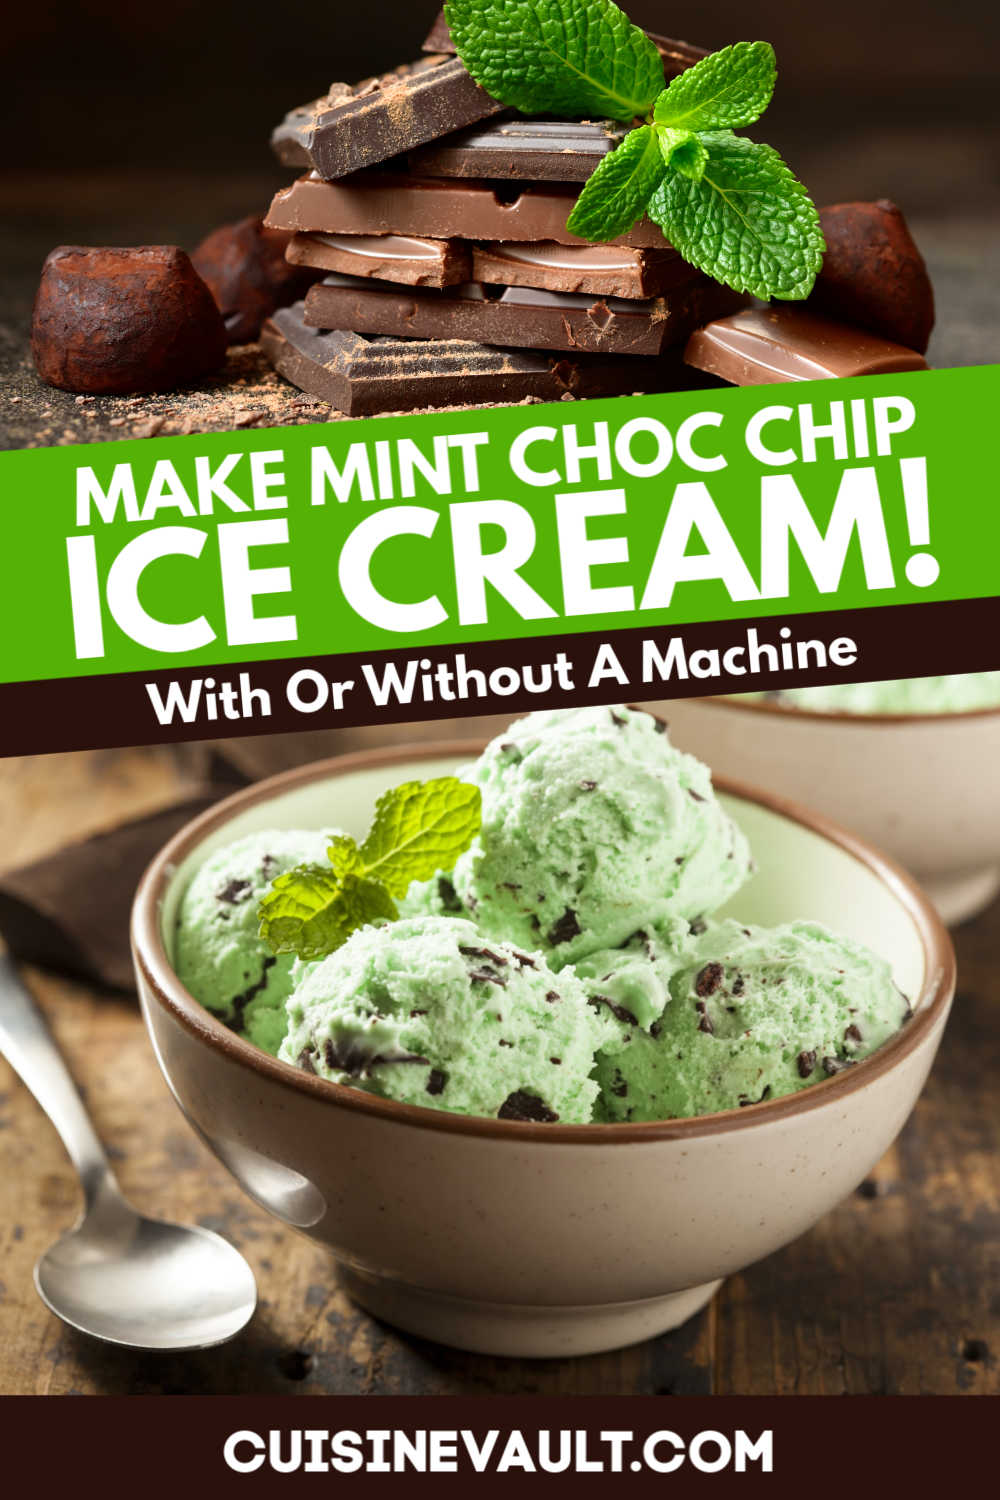 Mint choc chip ice cream in a bowl next to chocolate